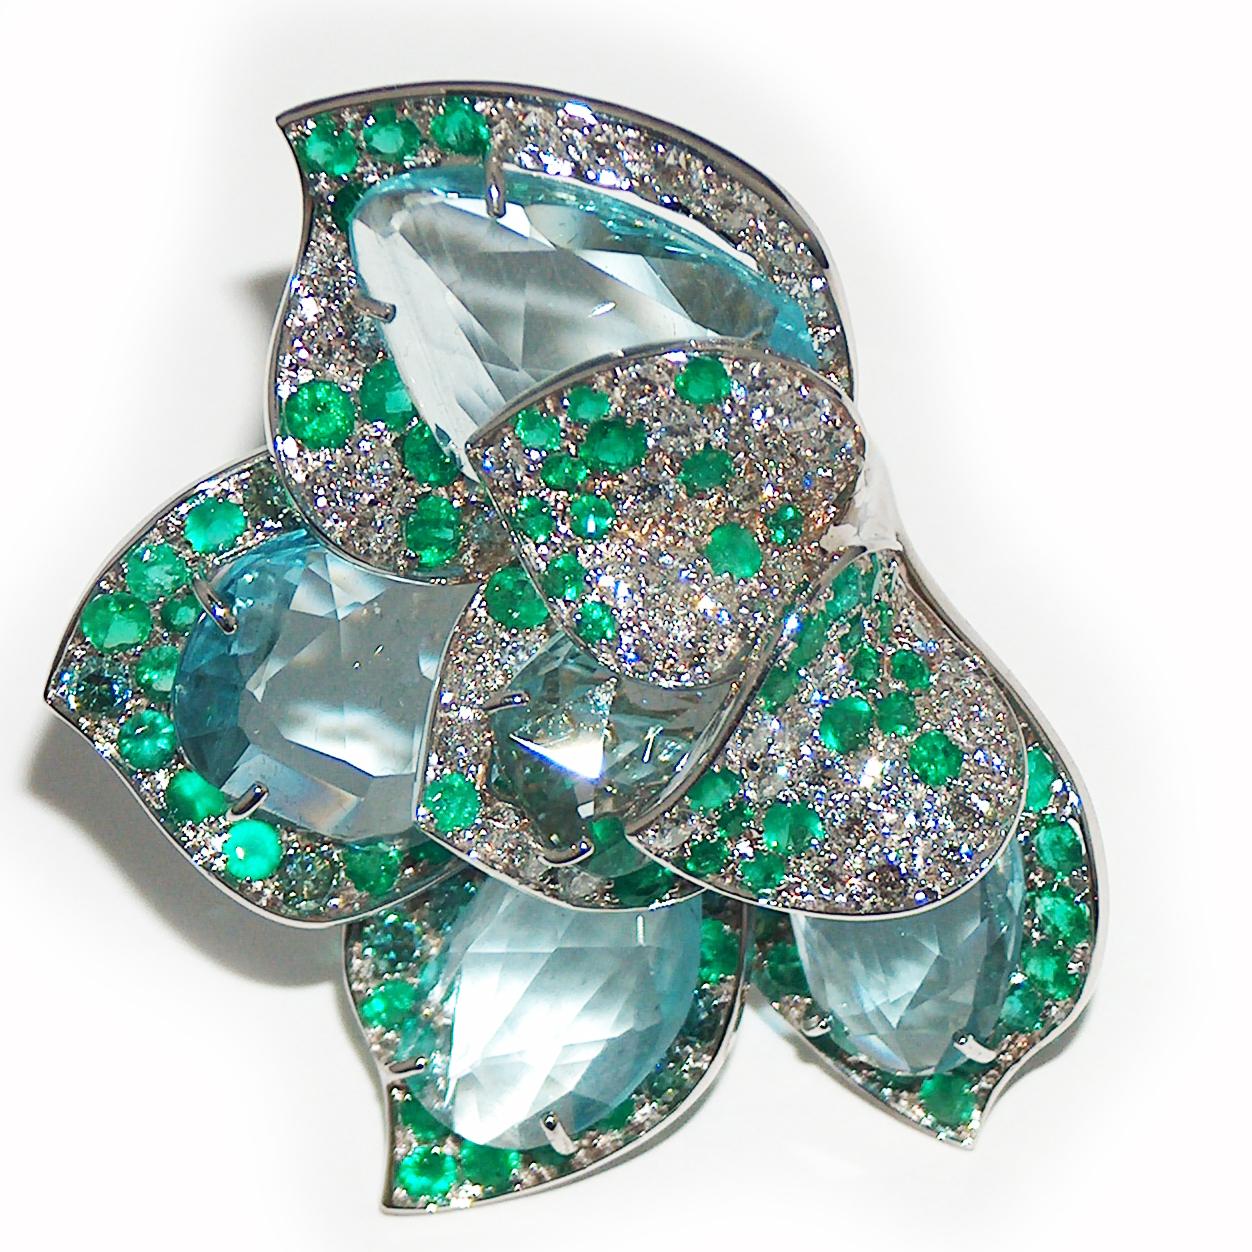 Ring in 18kt white gold which sets White Diamonds for ct. 2,98, Emeralds for ct. 3,88 and Aquamarine for ct. 25,37.

Unique piece, designed and handcrafted in Italy, by visionary goldsmith Paolo Piovan. 

This extra-ordinary ring has become a